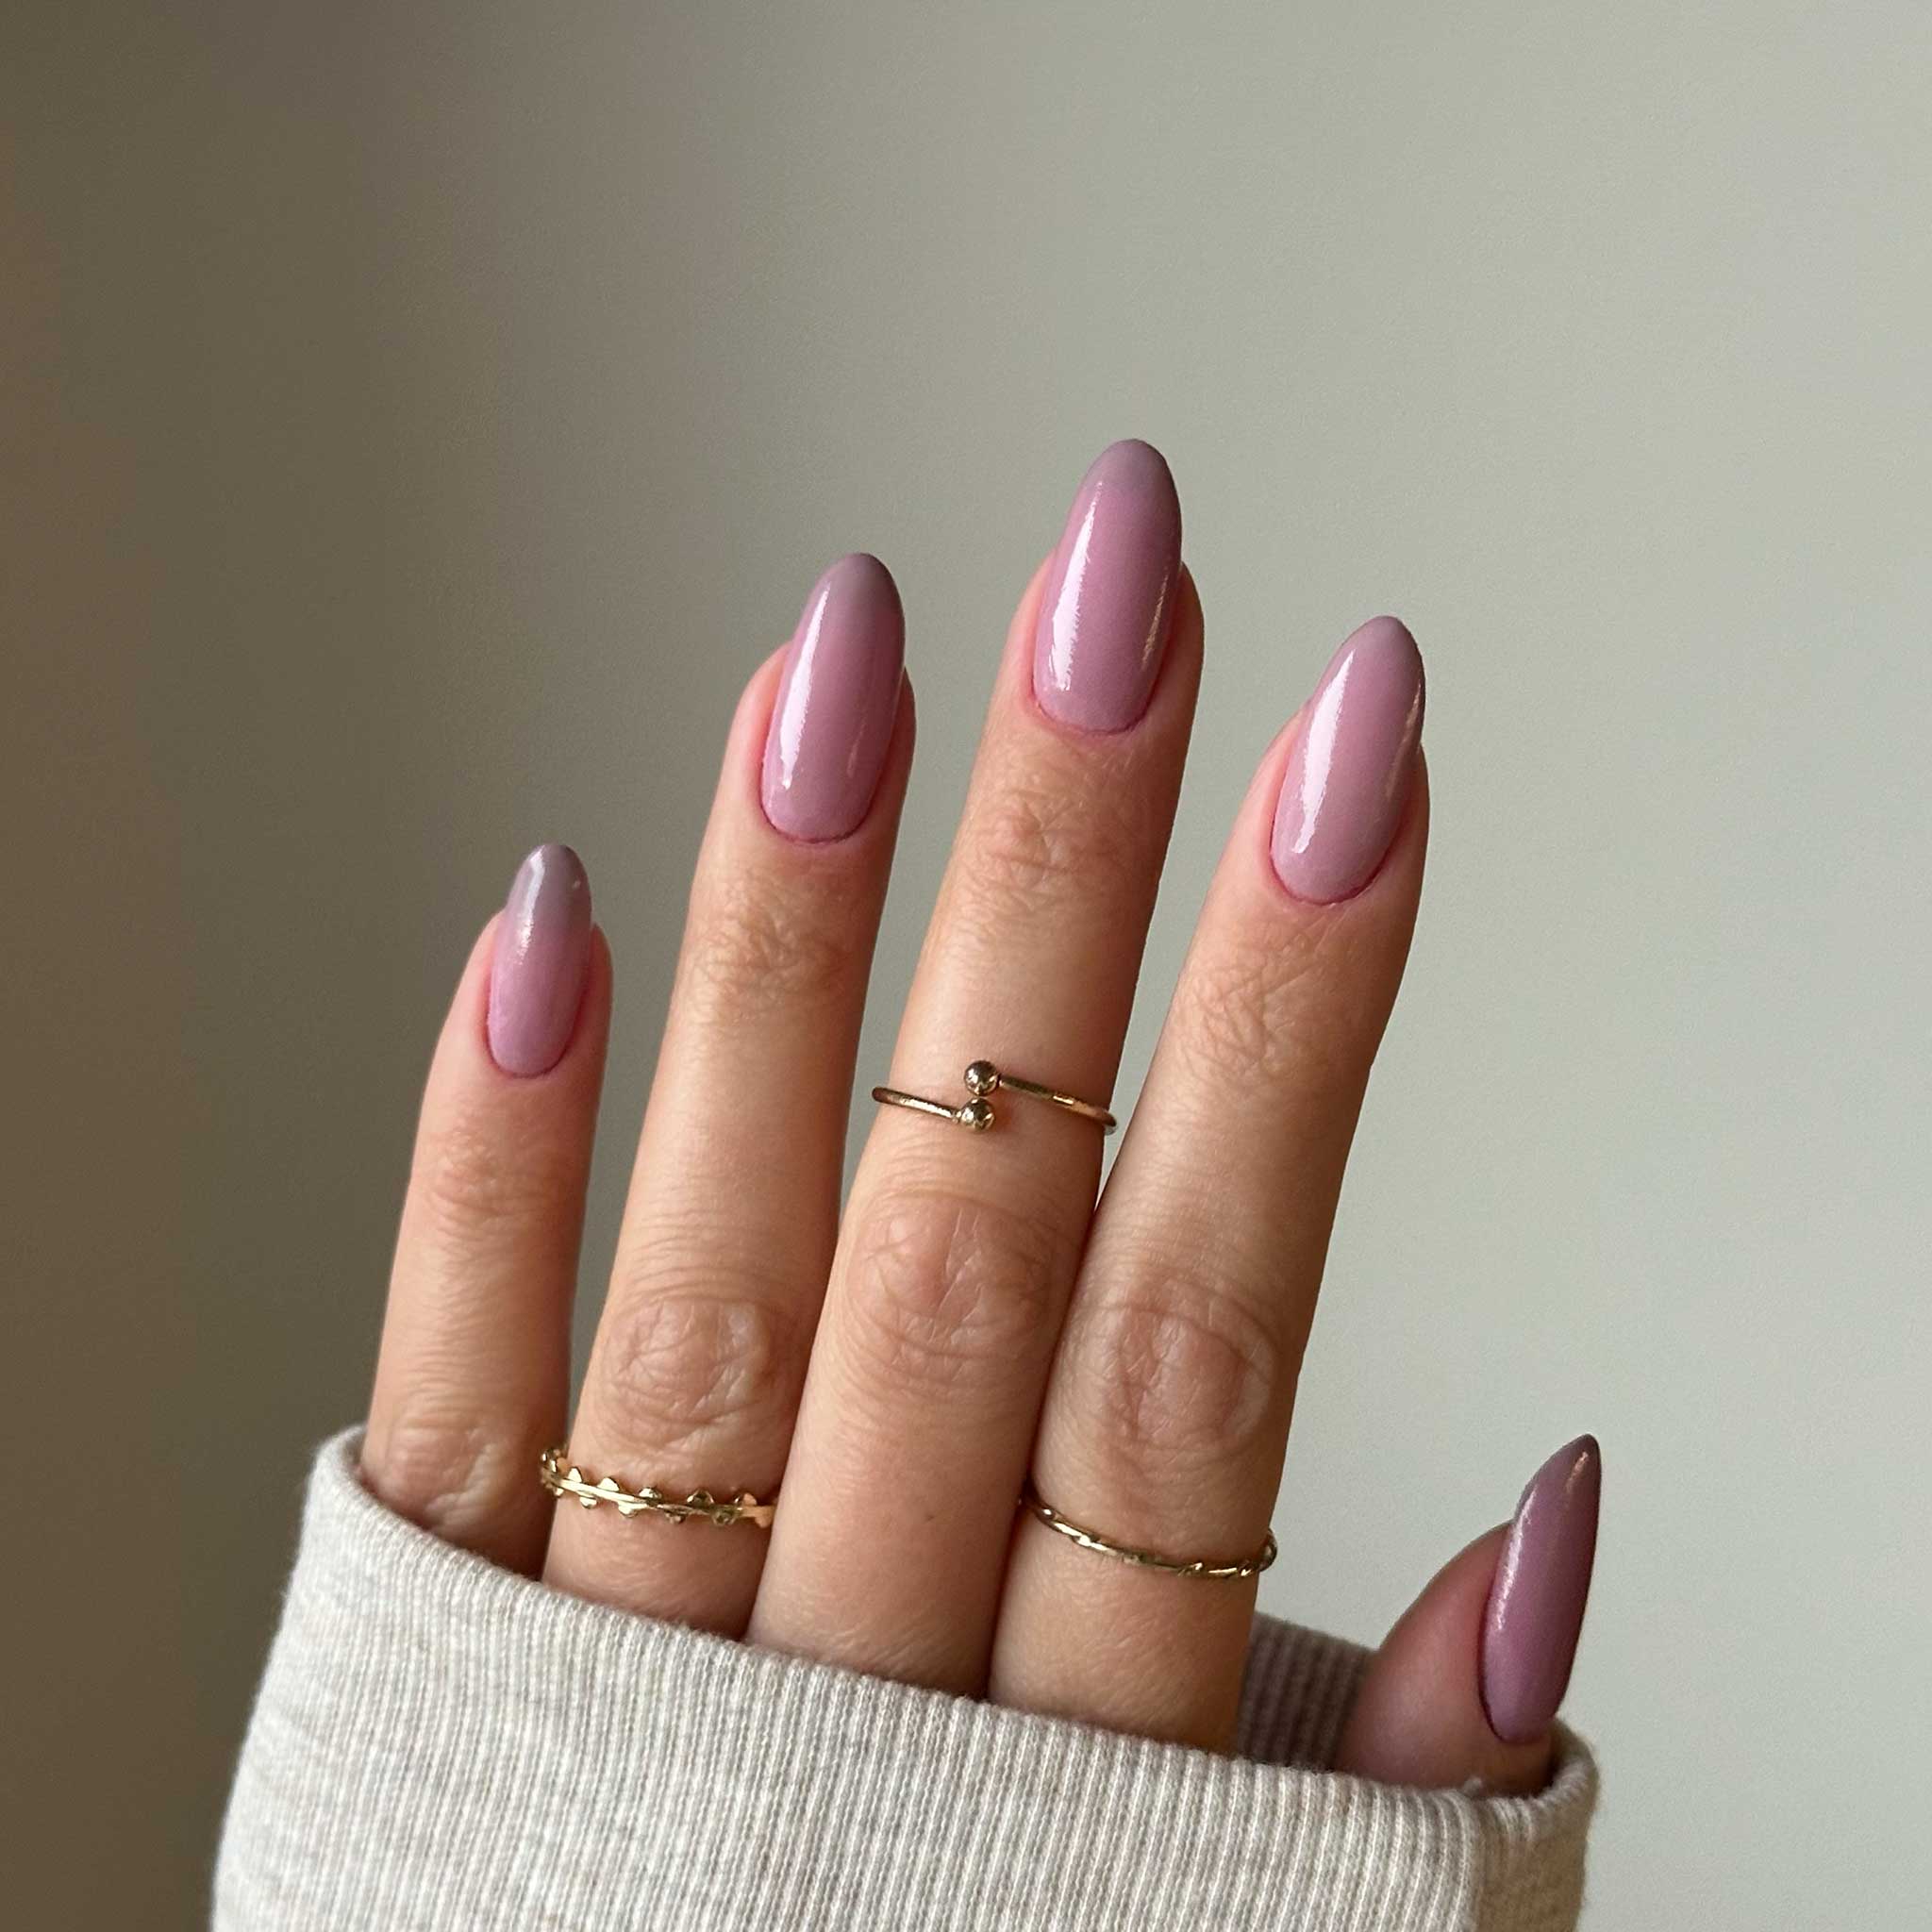 Buy Bhavya Nails - Light Pink Stone Bridal - Artificial Nails / Press On  Nails - Set of 14 Nails Online at Low Prices in India - Amazon.in